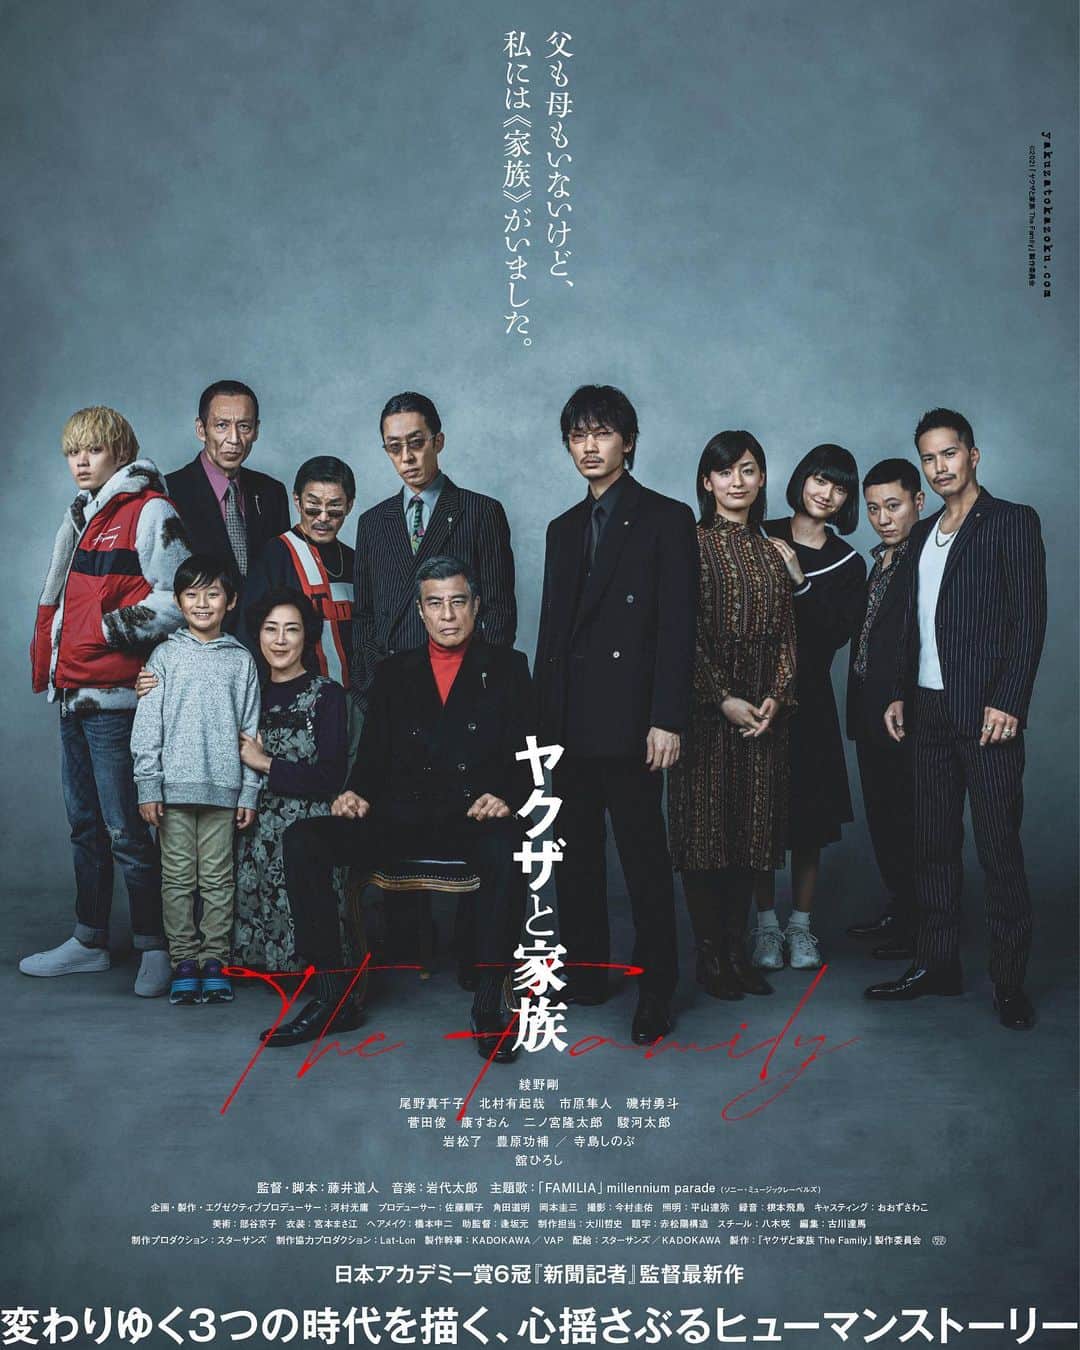 millennium paradeのインスタグラム：「“The Family” staring @go_ayano_official  premieres today and features our latest song, FAMILIA  いよいよ本日「ヤクザと家族 The Family」  @yakuzatokazoku_movie2021 が公開. 主題歌"FAMILIA"を担当しています.  素晴らしい作品.  ［link in bio］https://youtu.be/DTER1zzFecM」